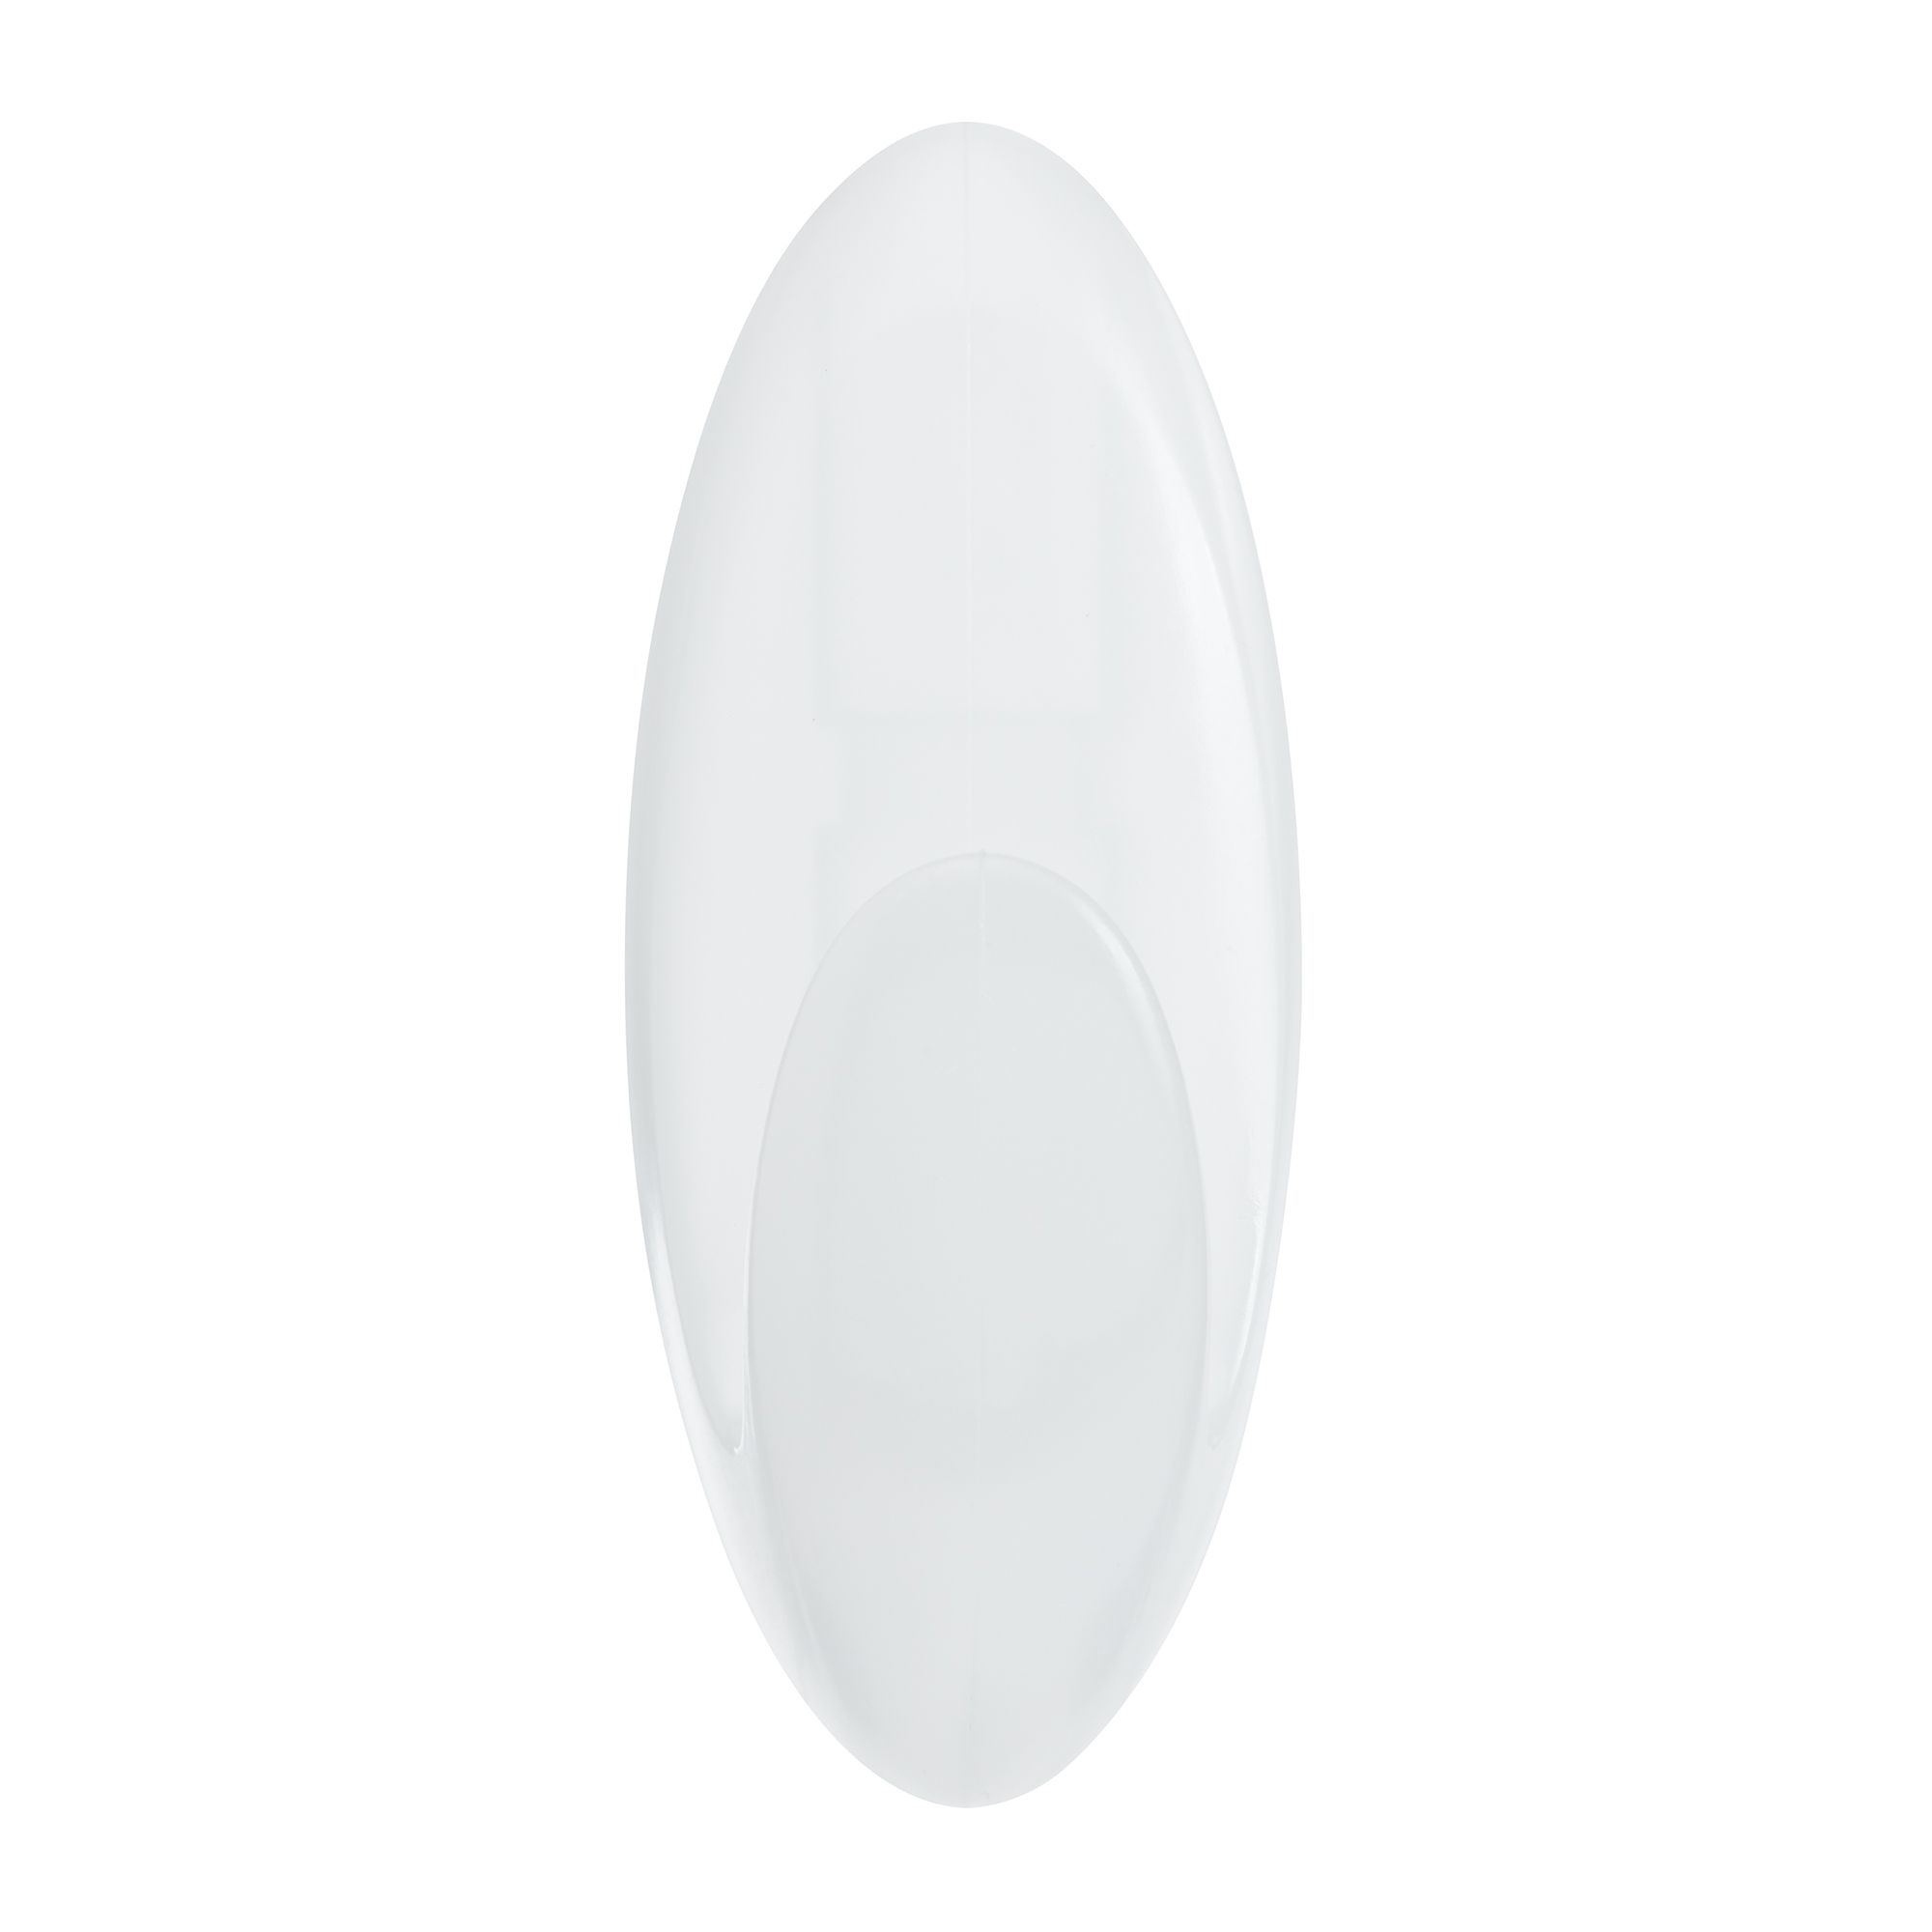 3M Command Bath Frosted effect Large Clear Towel Hook (Holds)2.2kg